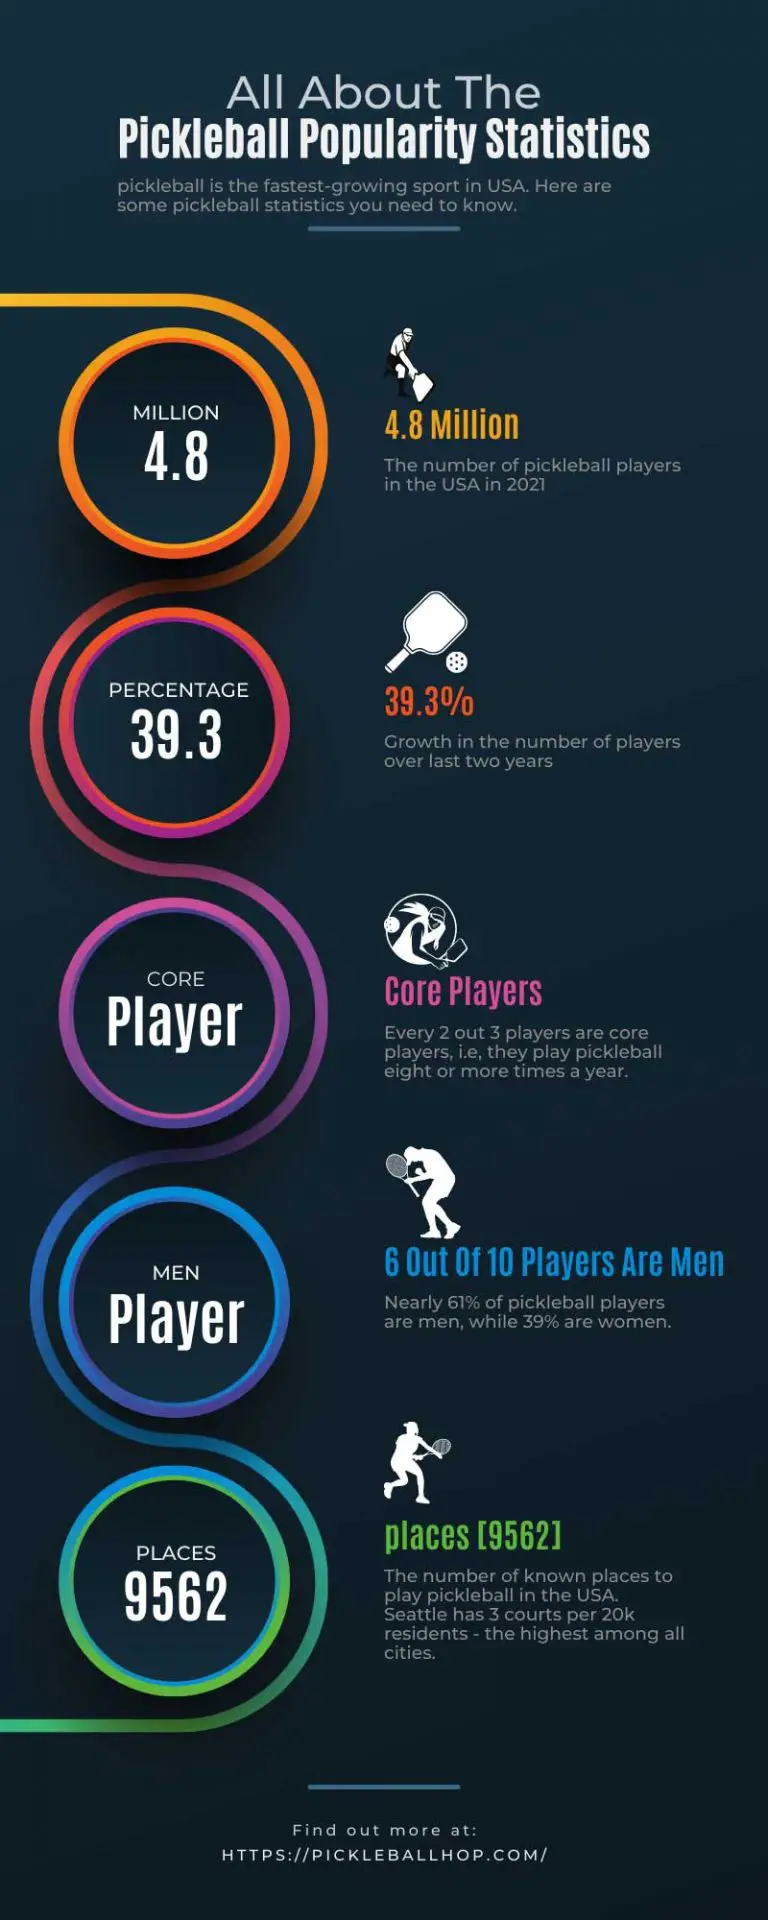 Pickleball Popularity Statistics and Demographics Facts and Figures